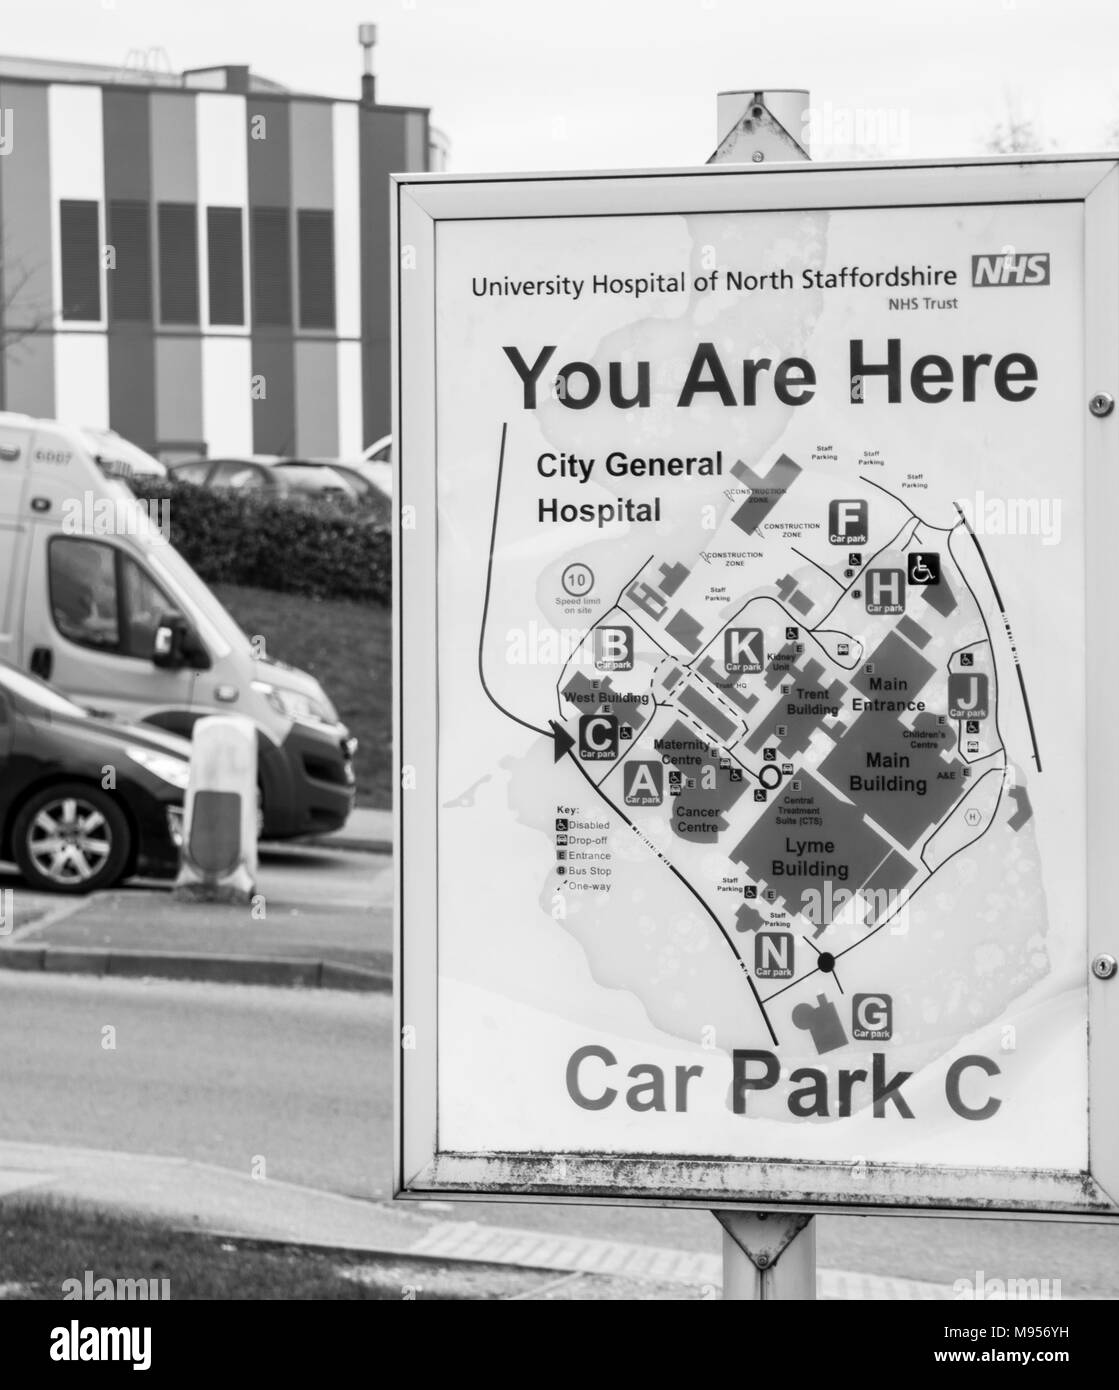 Royal Stoke Hospital You Are Here sign with ambulance and buildings in the background Stock Photo